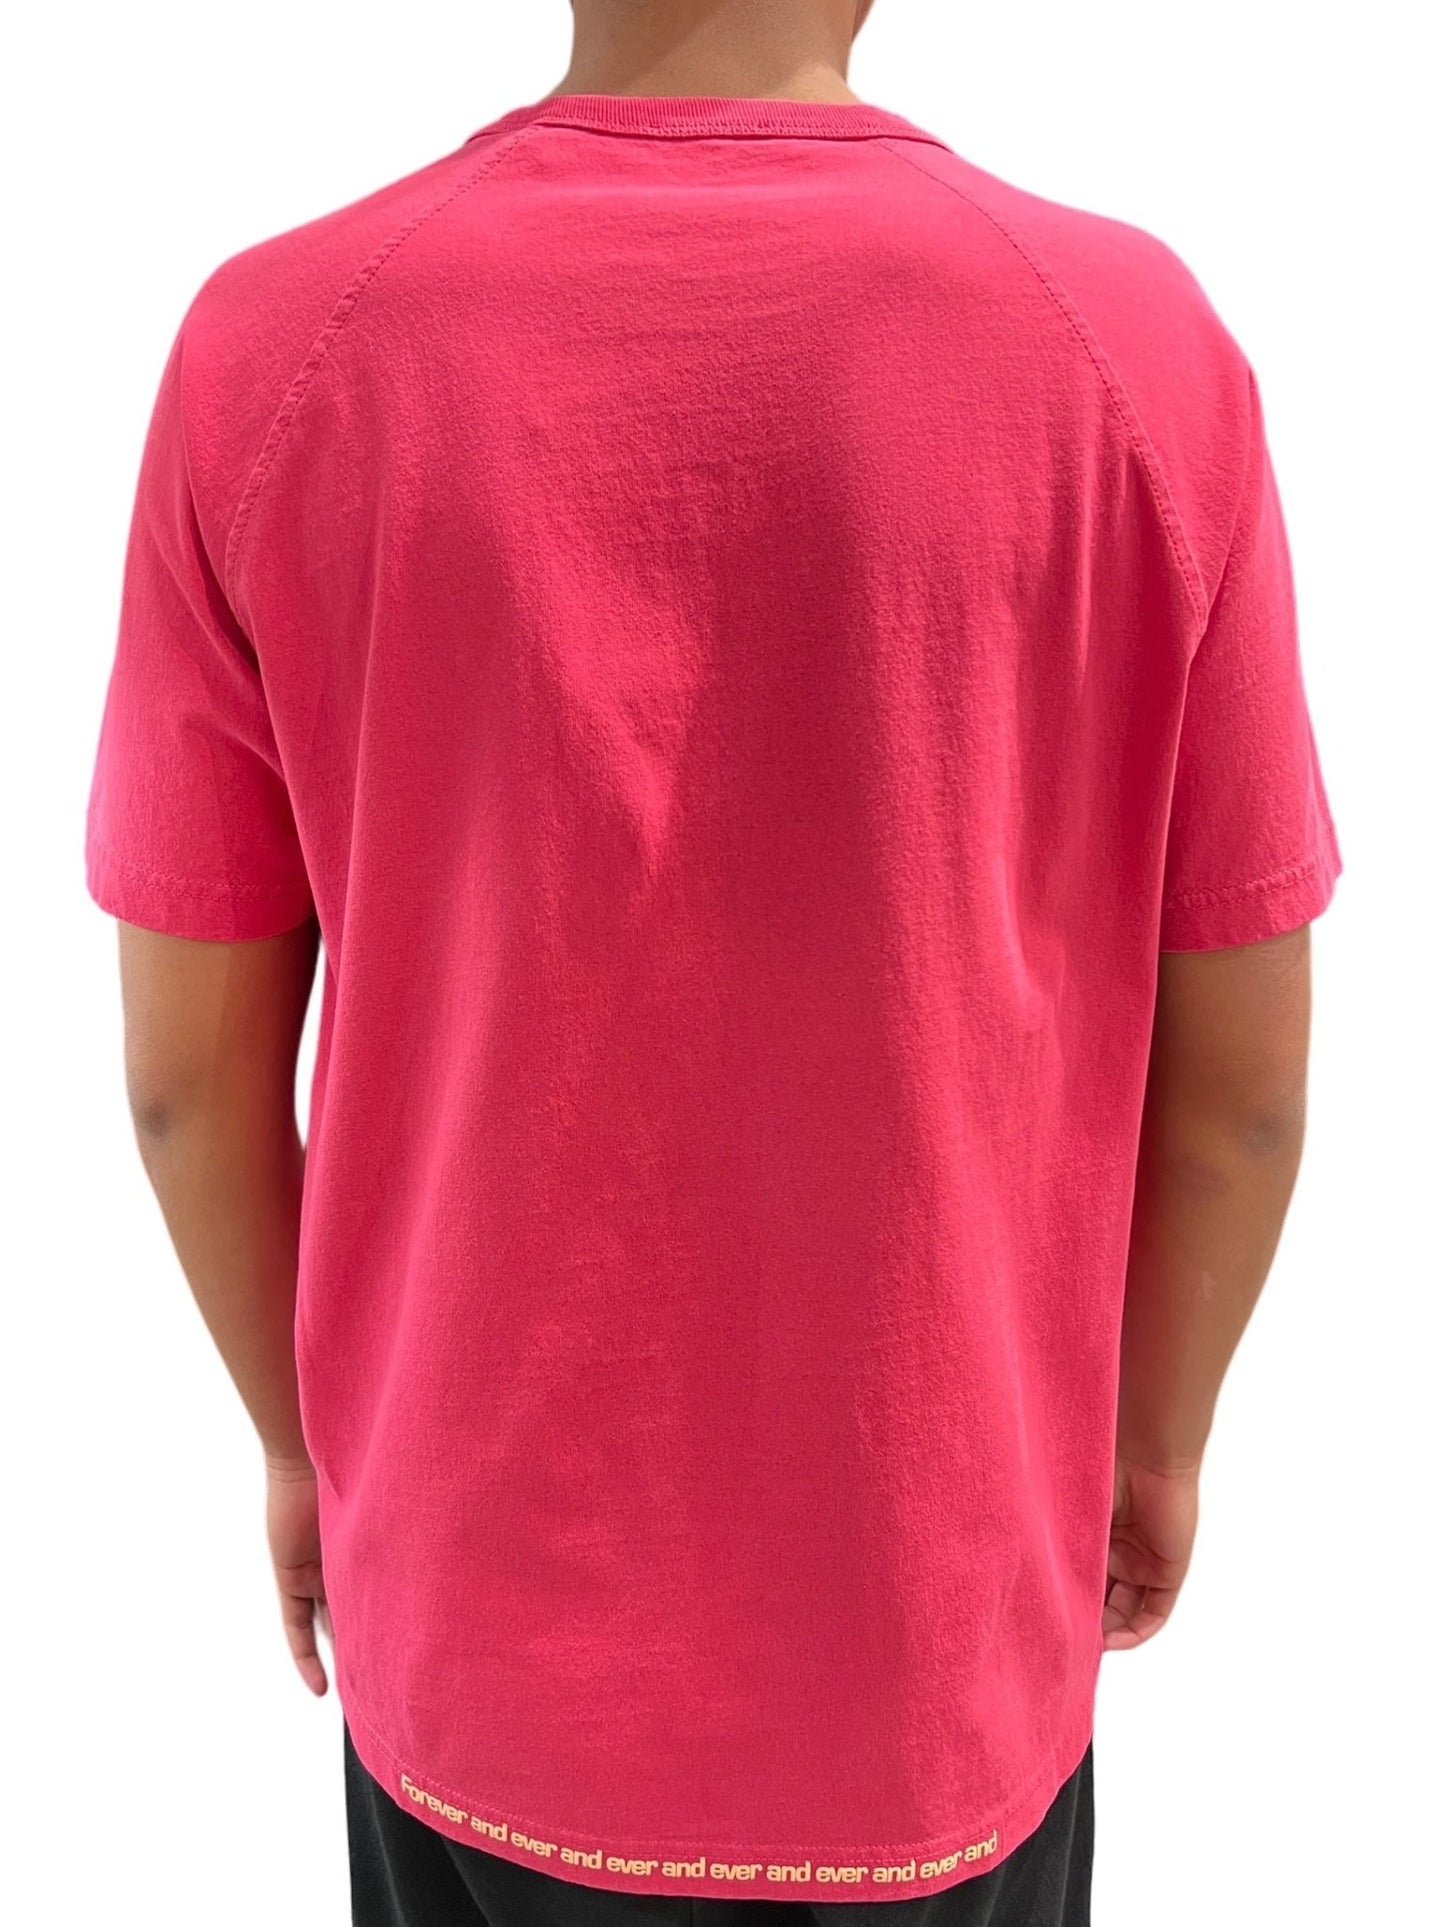 A person standing with their back to the camera, wearing a Diesel T-Rust T-shirt in baby pink with text along the lower hem.